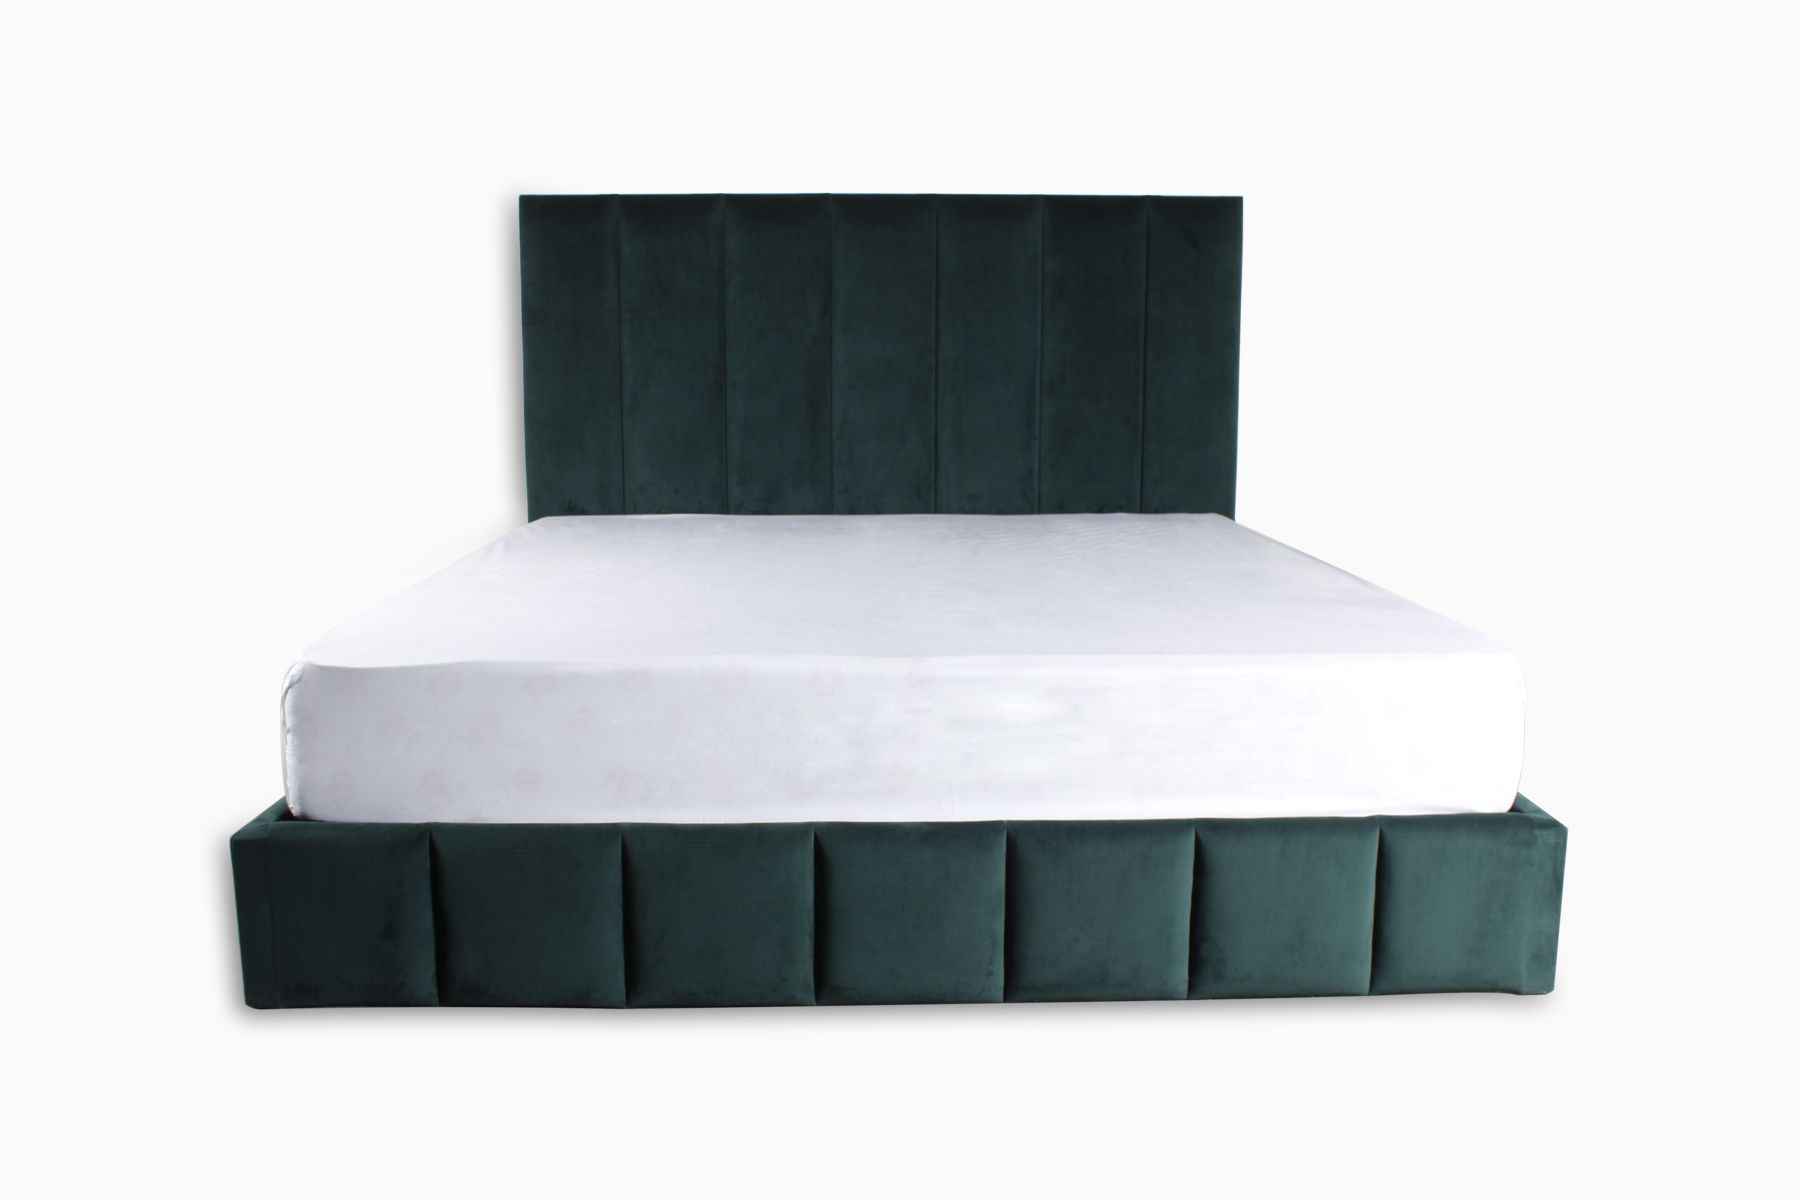 XINGTON UPHOLSTERED BED